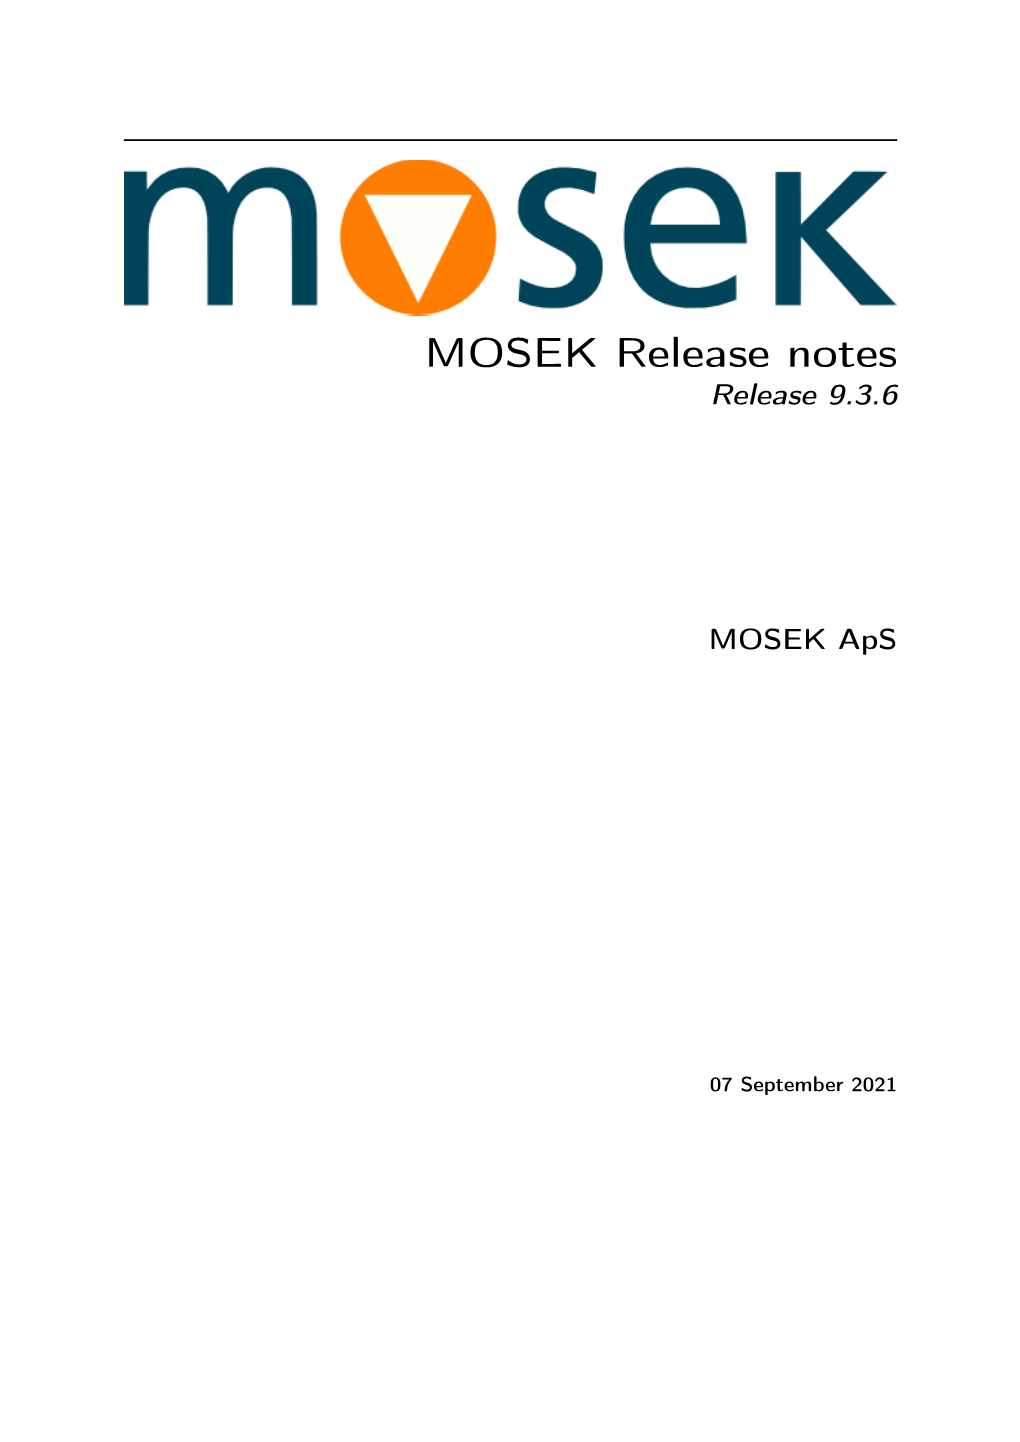 MOSEK Release Notes Release 9.3.6